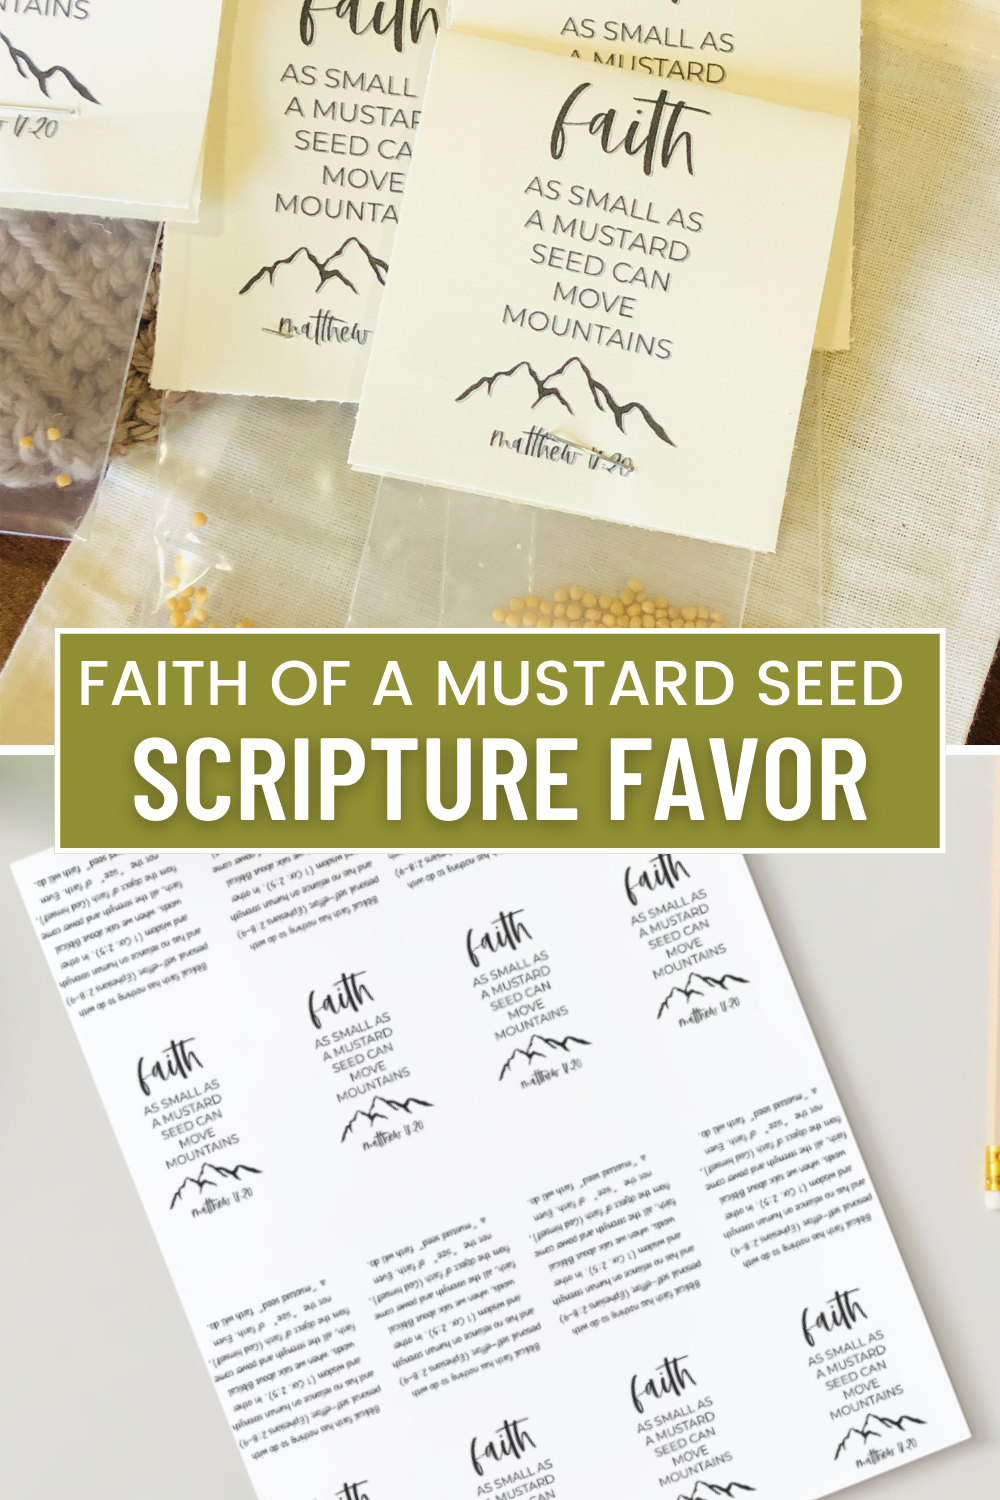 "Faith as Small as a Mustard Seed Can Move Mountains" scripture favor and free printable is perfect for churches, VBS, Sunday school or as a Soul Winning favors to help spread the Gospel message of Christ.